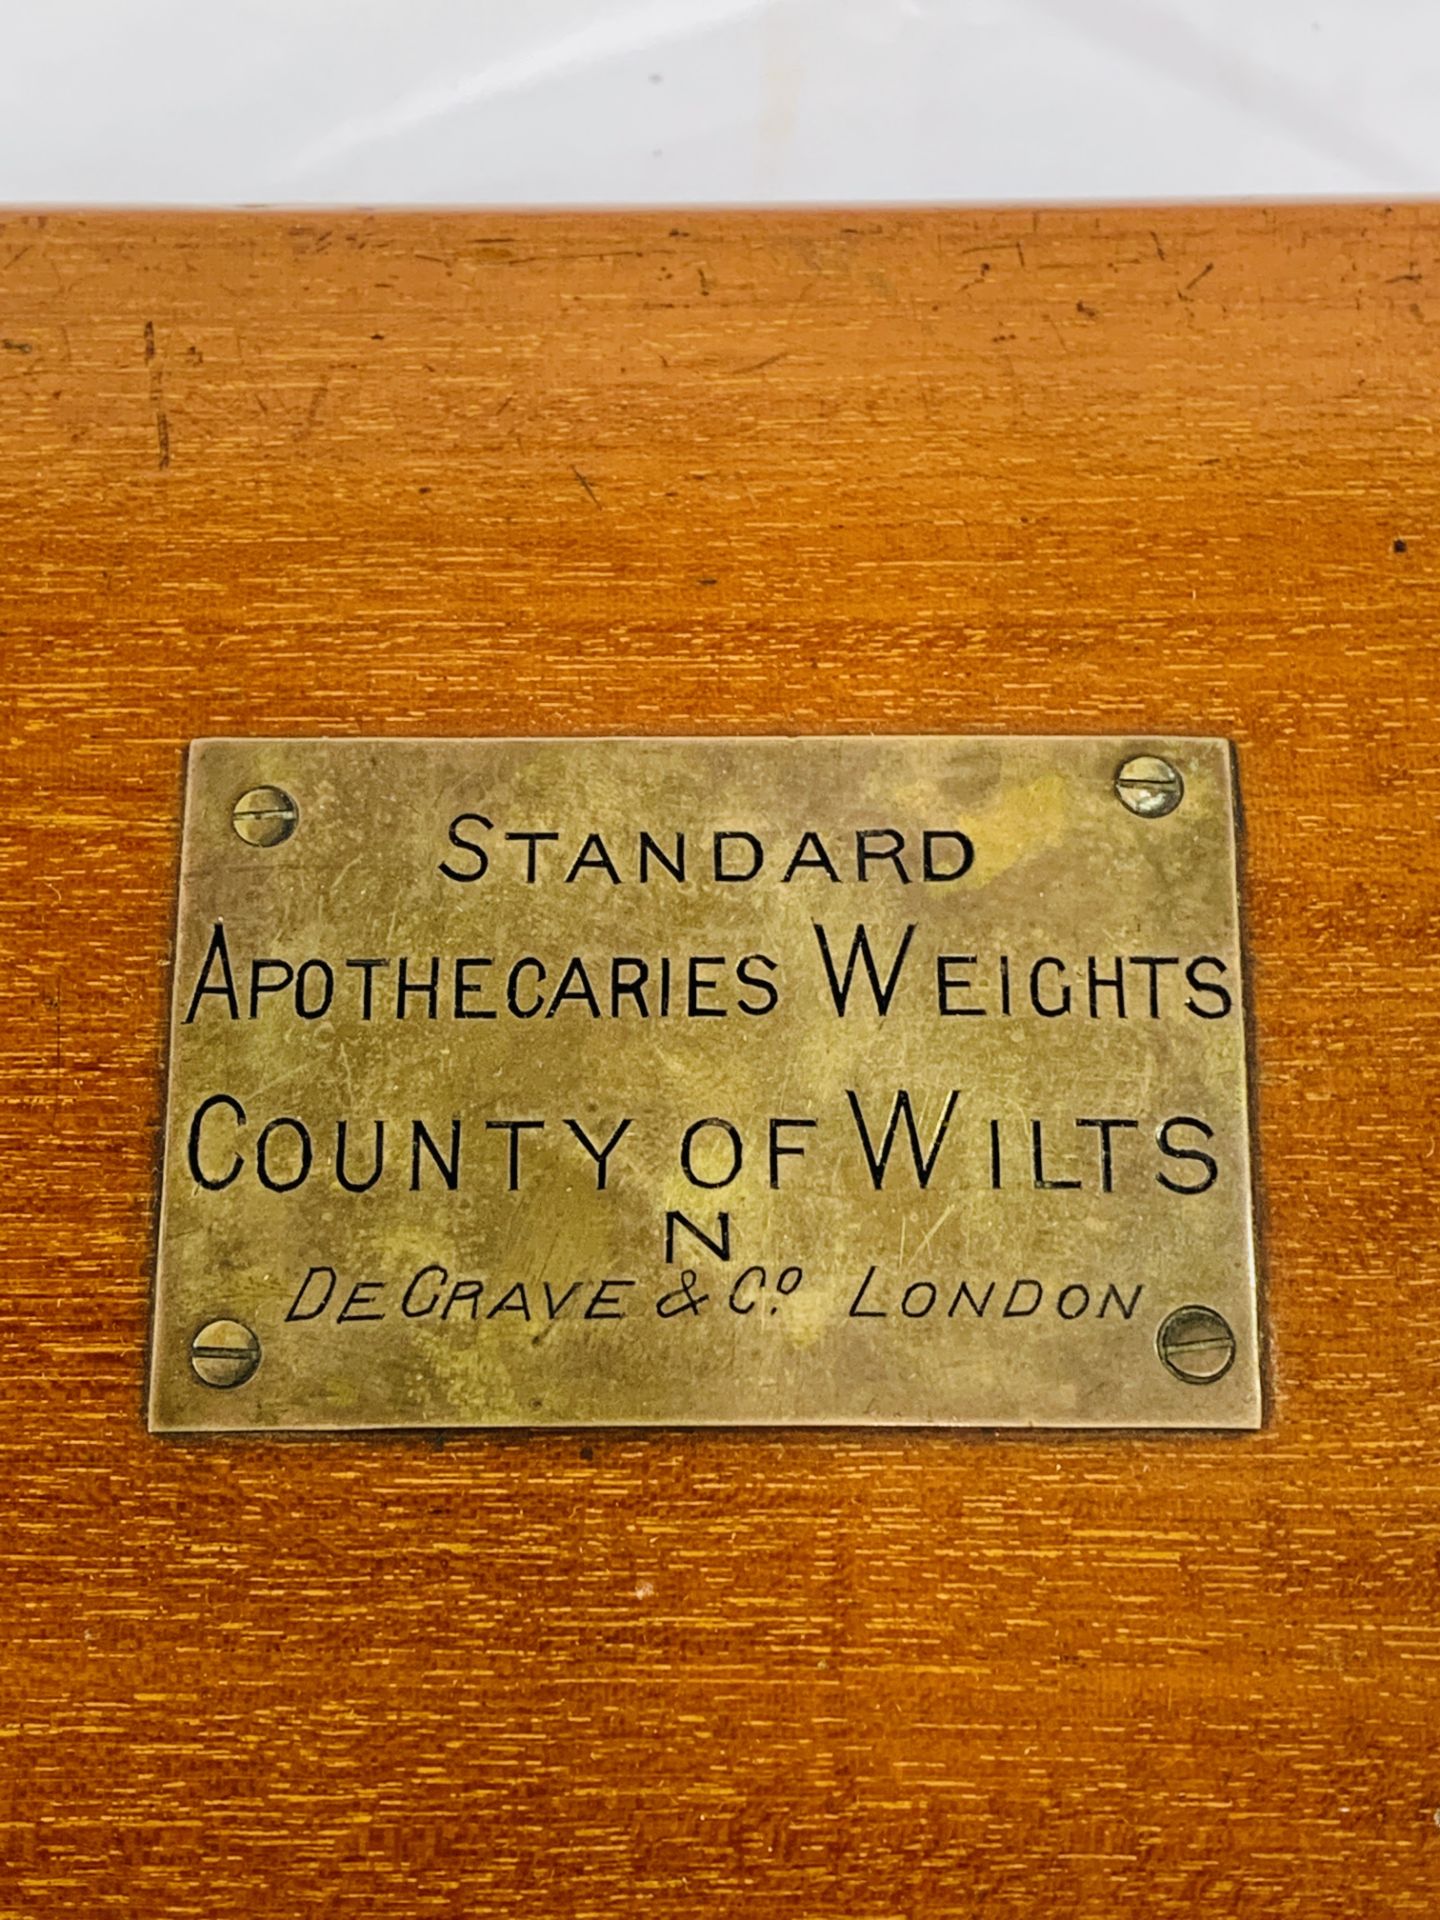 Mahogany box of weights labelled "Standard Apothecaries Weights, County of Wilts, De Grave, London" - Image 6 of 6